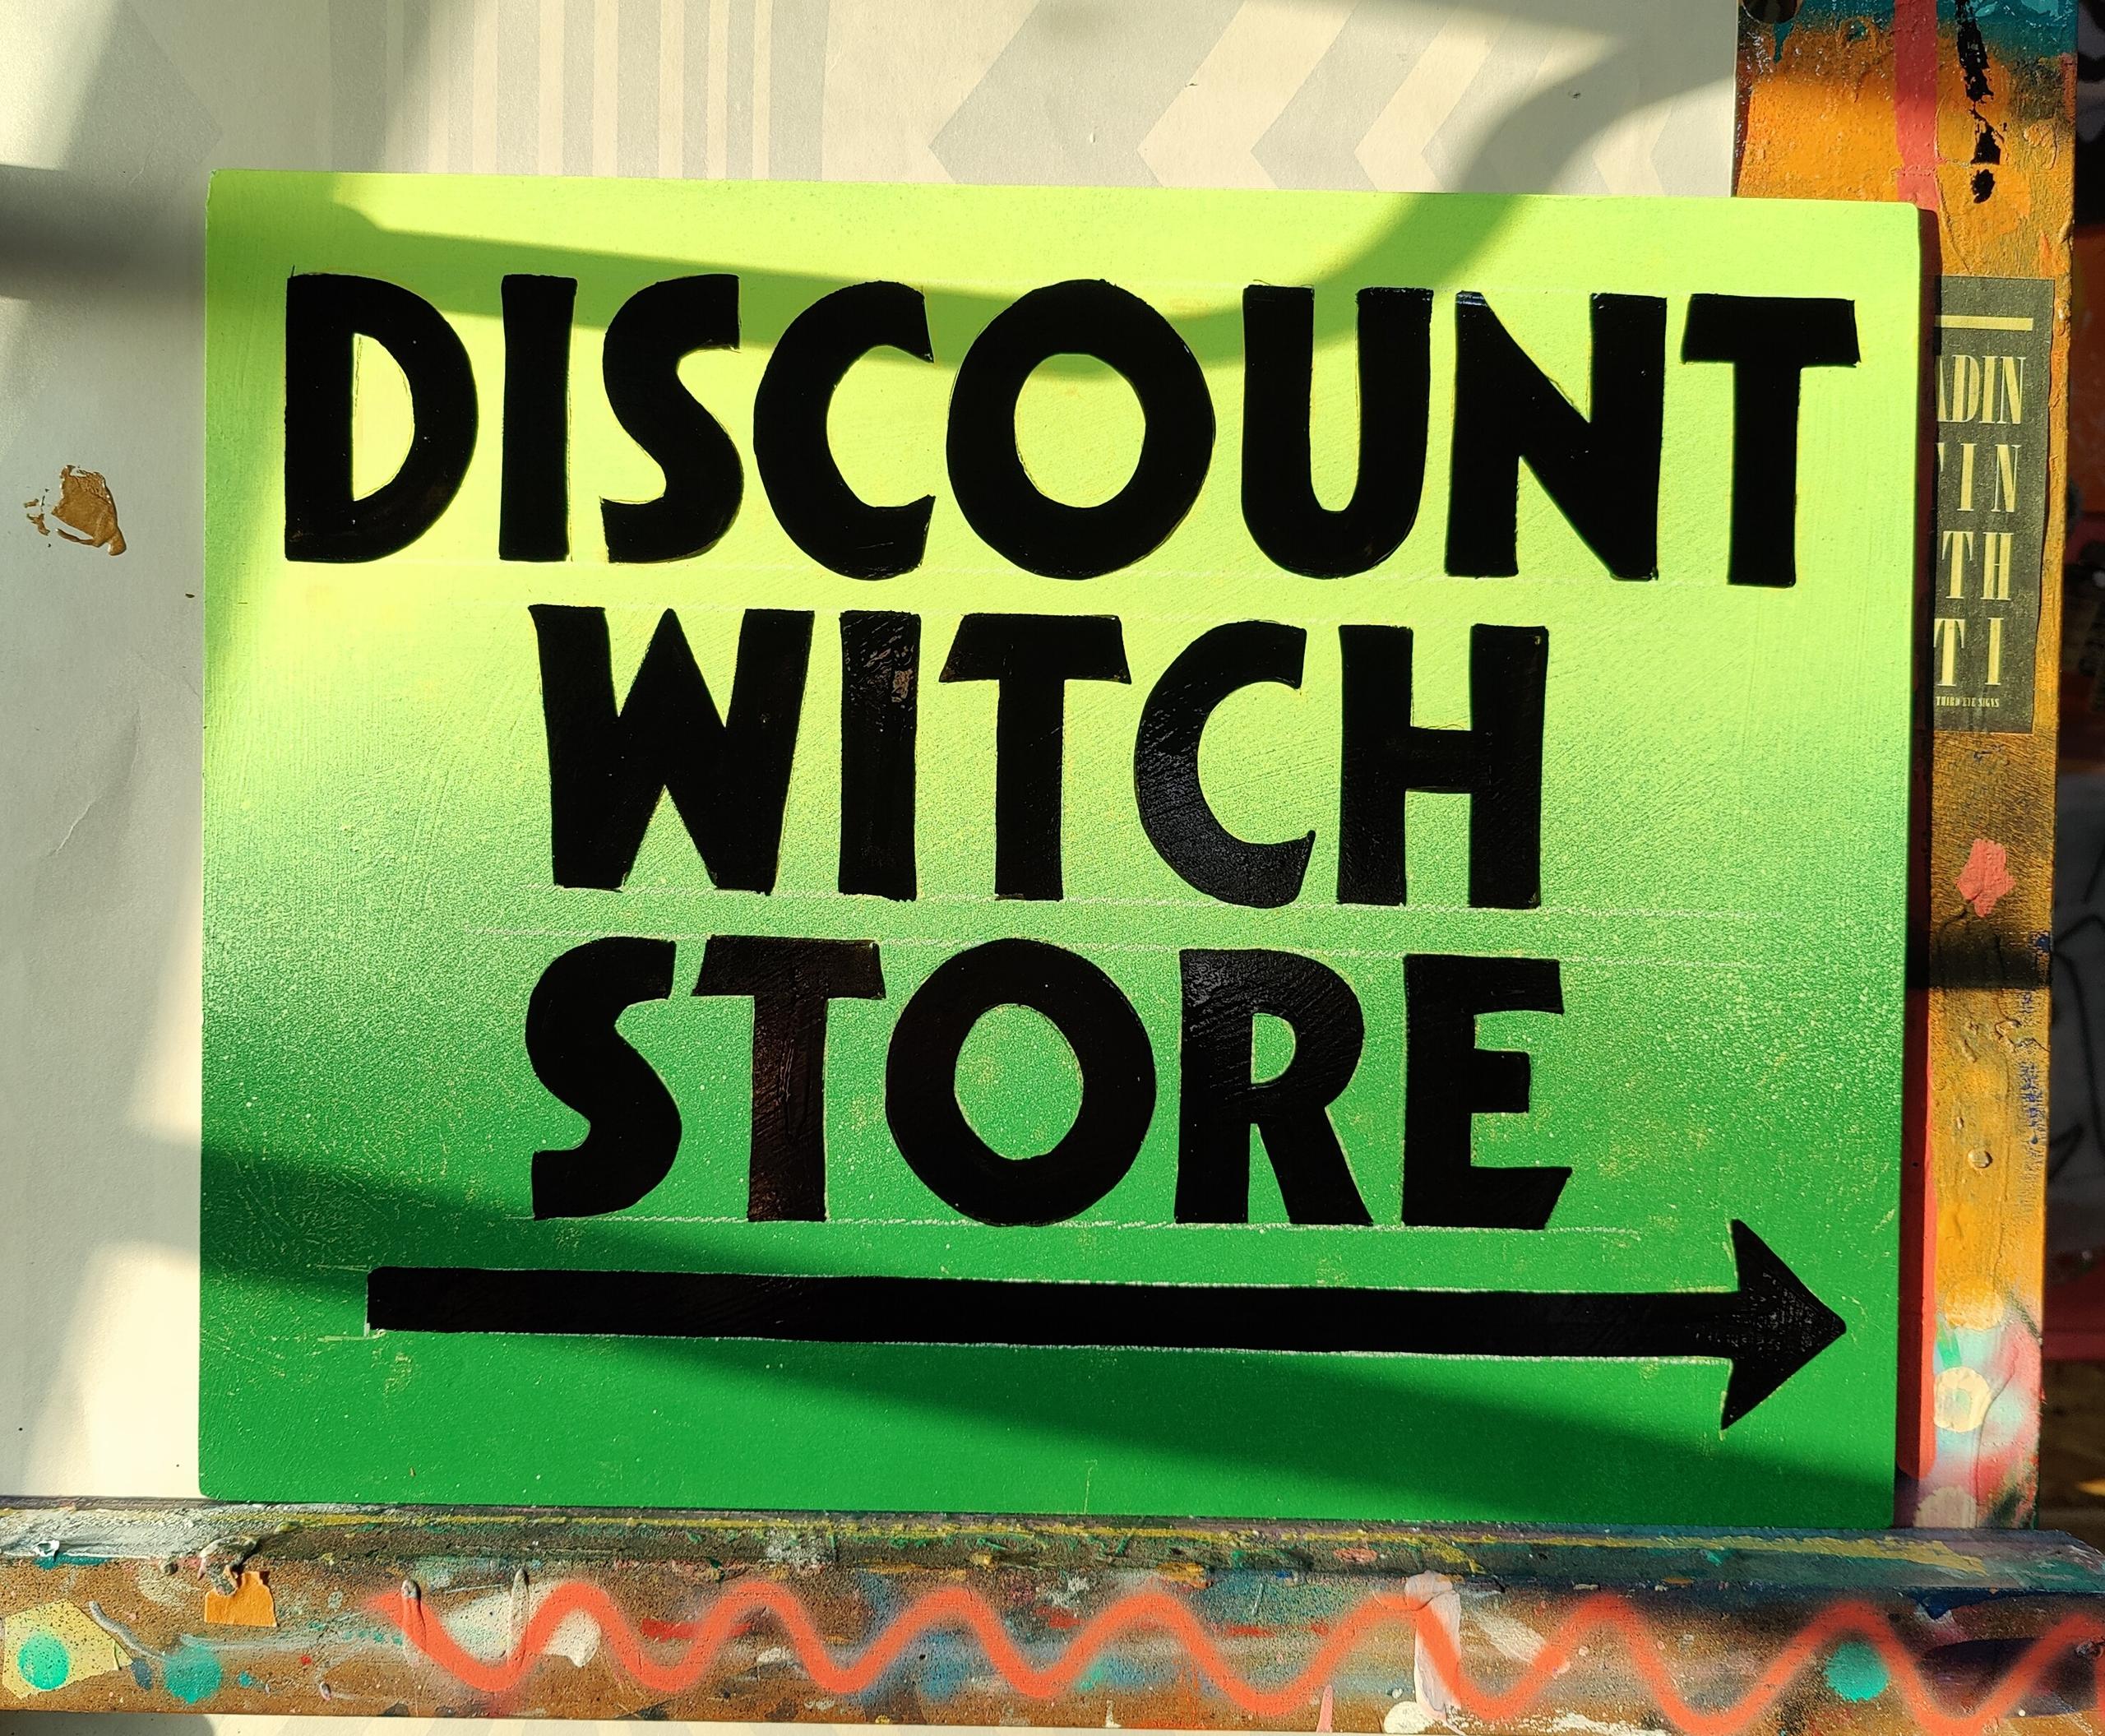 DISCOUNT WITCH STORE - A3 DIBOND PANEL